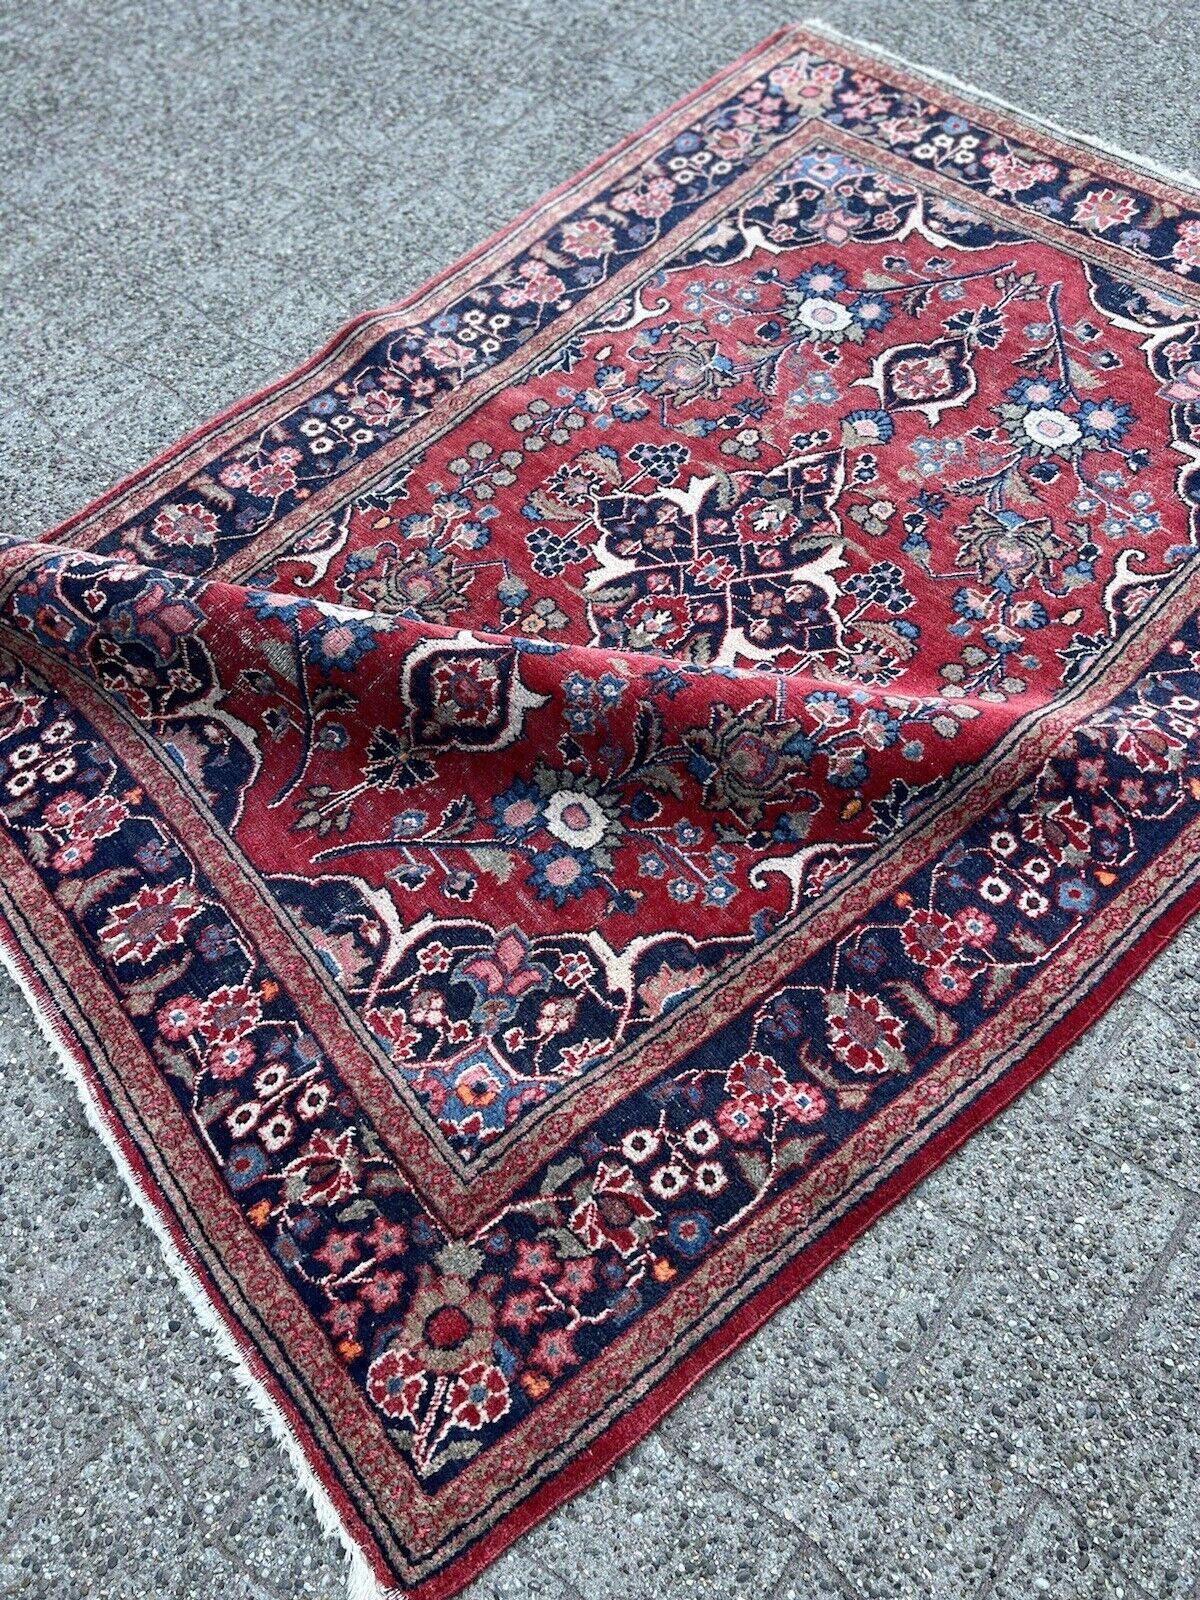 Handmade Antique Persian Style Kashan Rug 4.4' x 6.5', 1920s - 1S43 In Good Condition For Sale In Bordeaux, FR